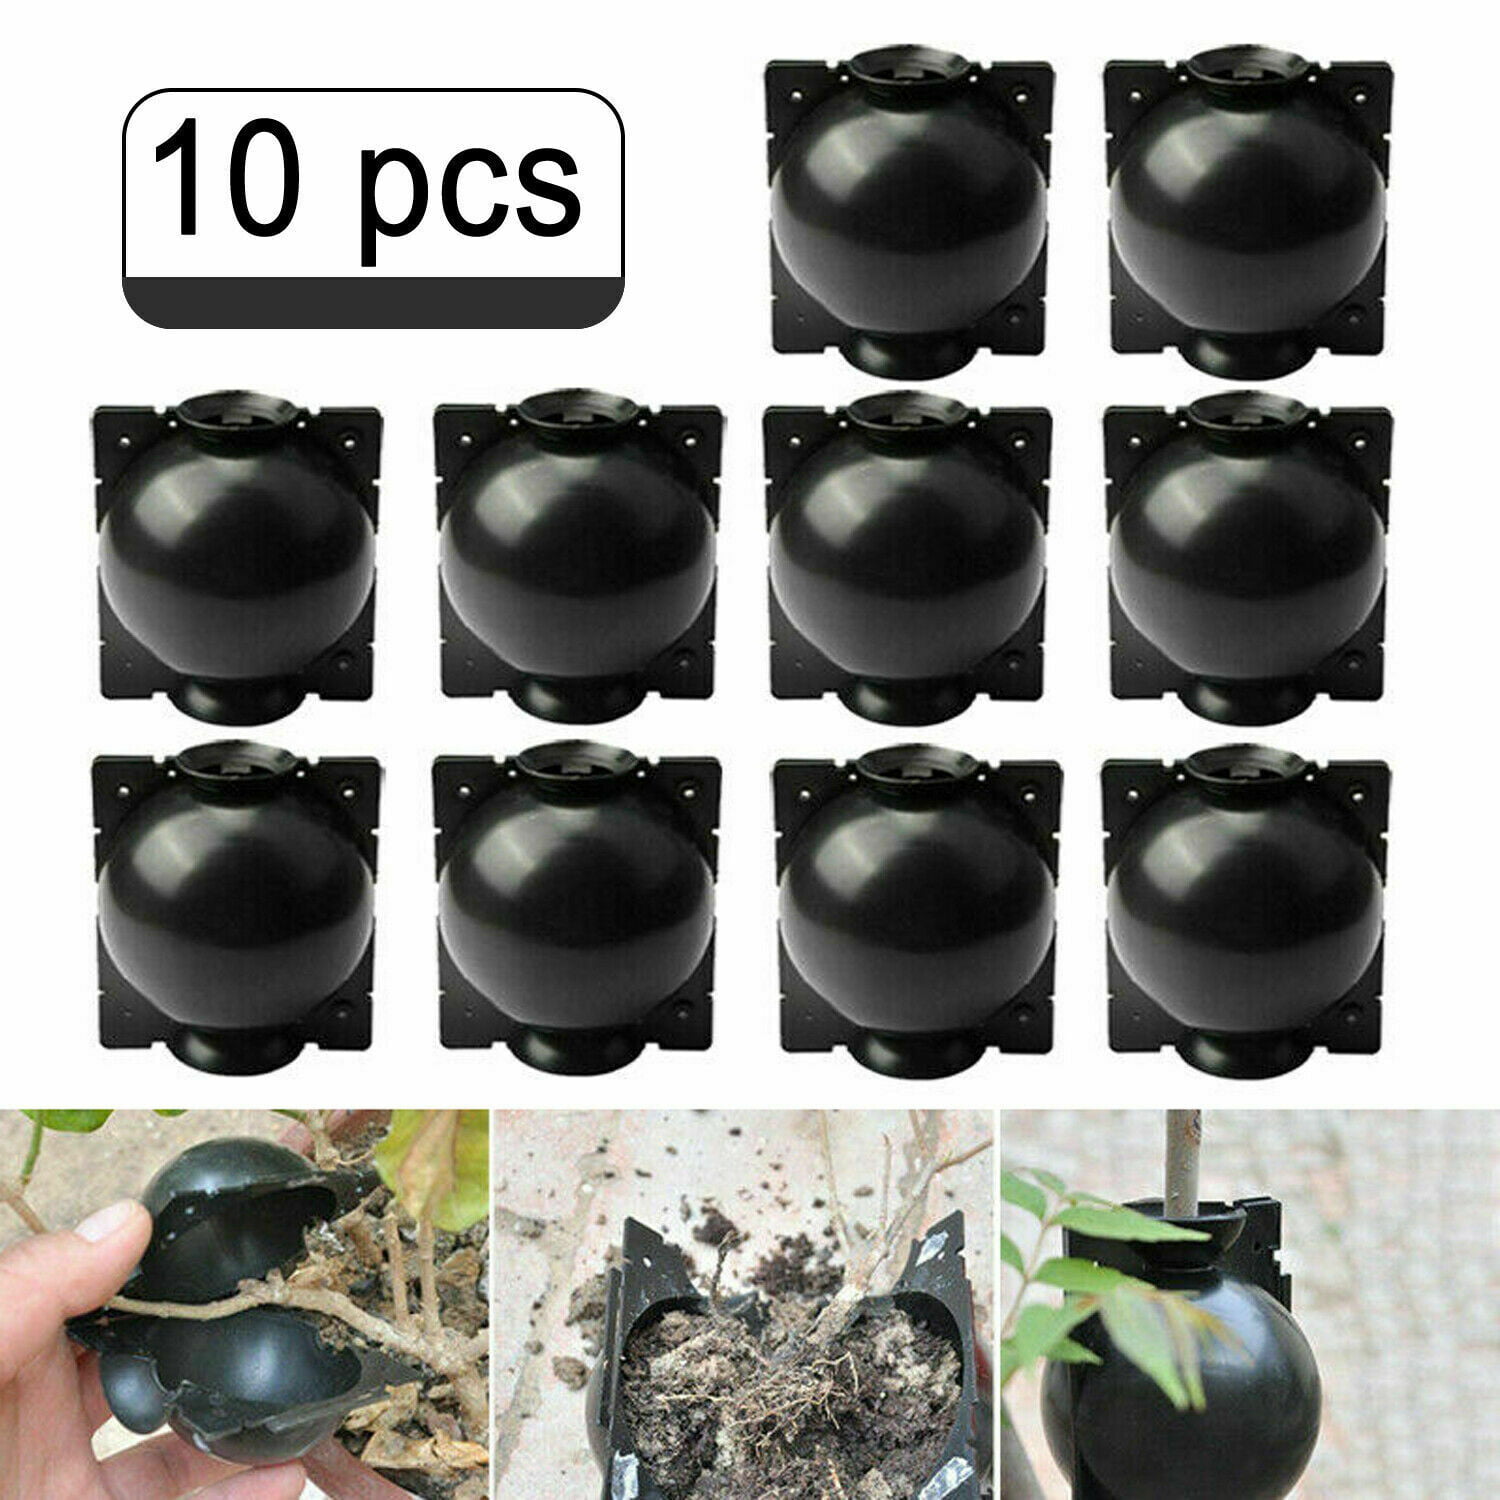 Details about   Plant Rooting Device High Pressure Propagation Ball Box Growing Garden Grafting 